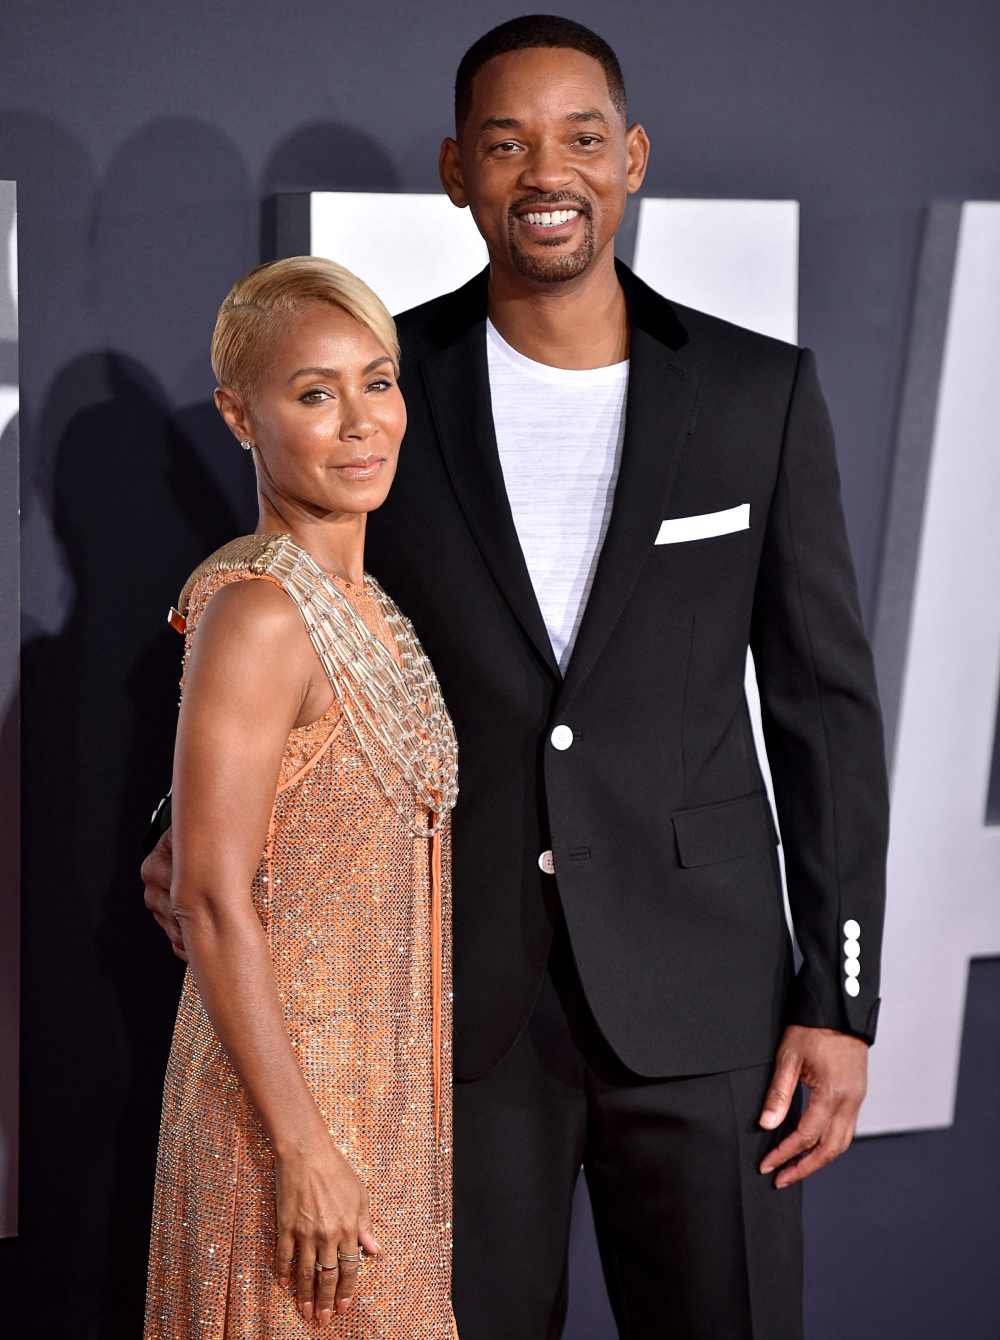 Jada Pinkett Smith Feels Like She Doesn't Know Will Smith After 22 Years of Marriage: 'Life Gets Busy'